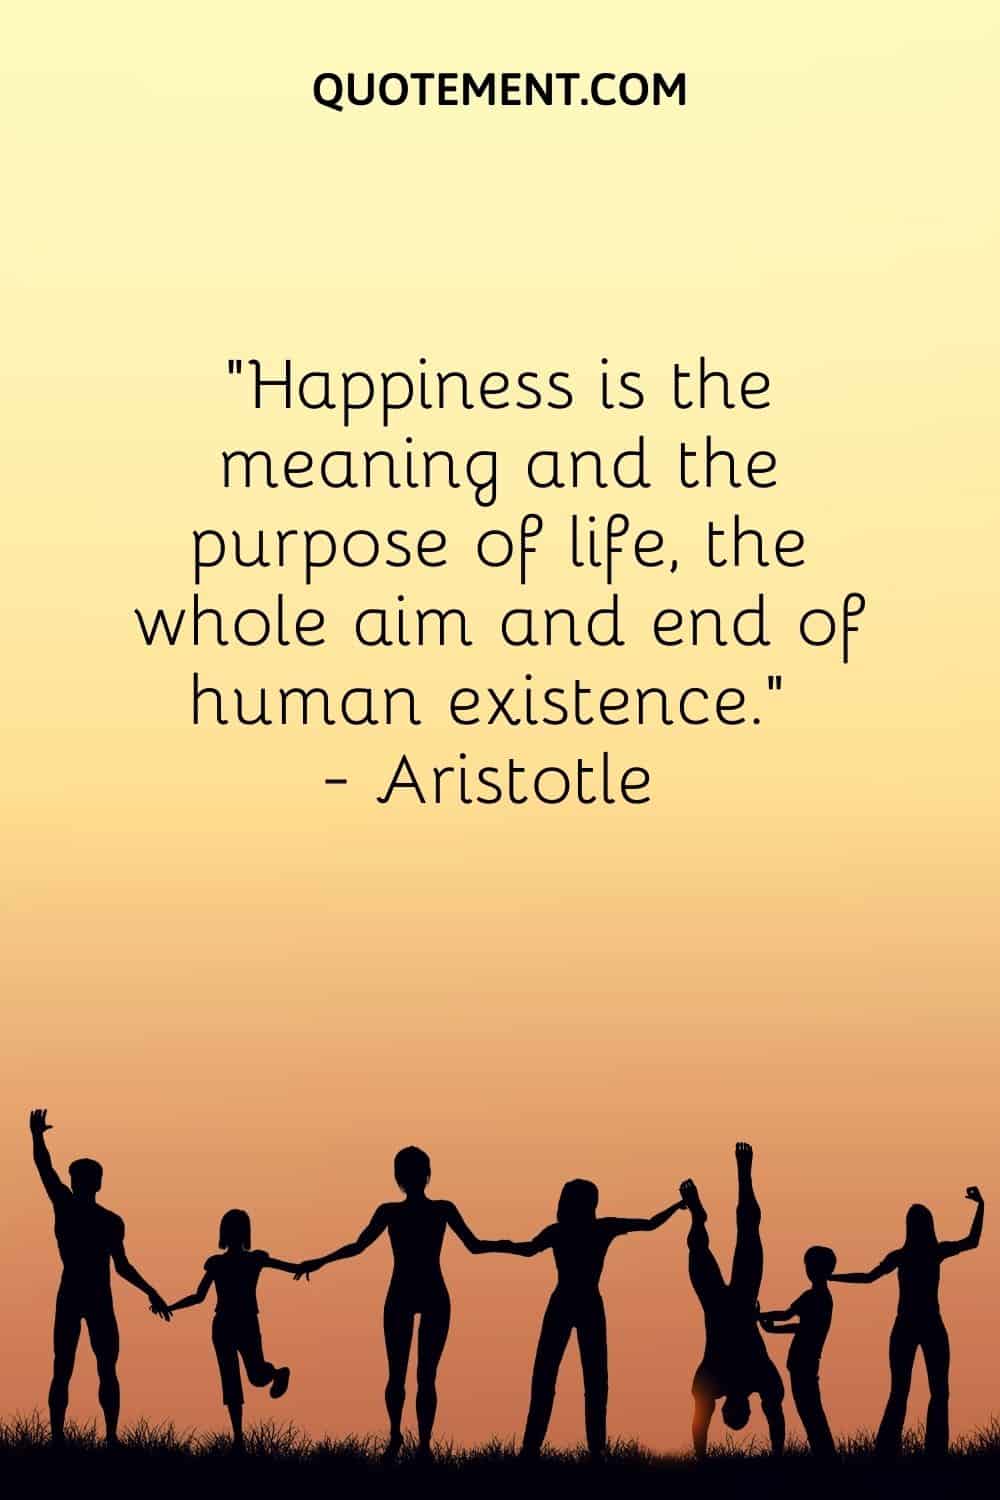 Happiness is the meaning and the purpose of life, the whole aim and end of human existence